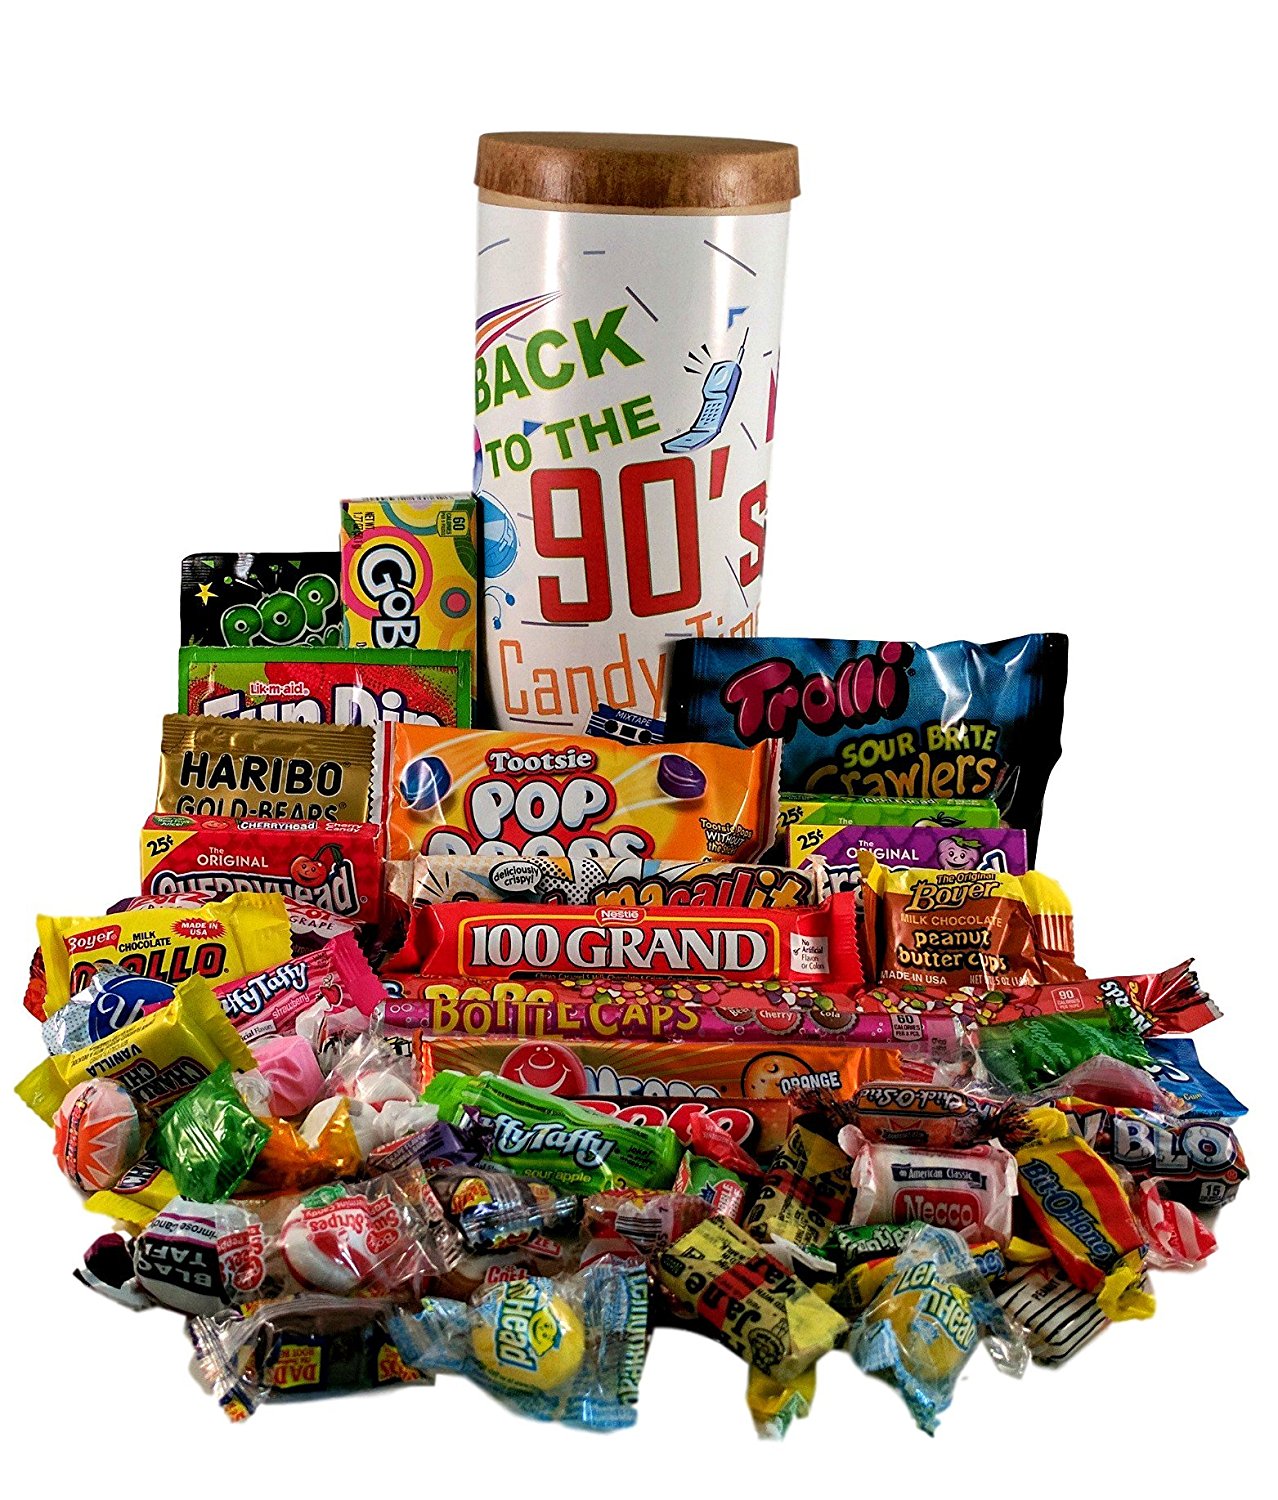 Who doesn't love candy, especially candy from their childhood, if that's you, then you need this Back to the 90's candy time capsule.  <br/><br/> You can pick this up at  <a href="https://amzn.to/2L0ZGNt">Amazon for about $39.99</a>.